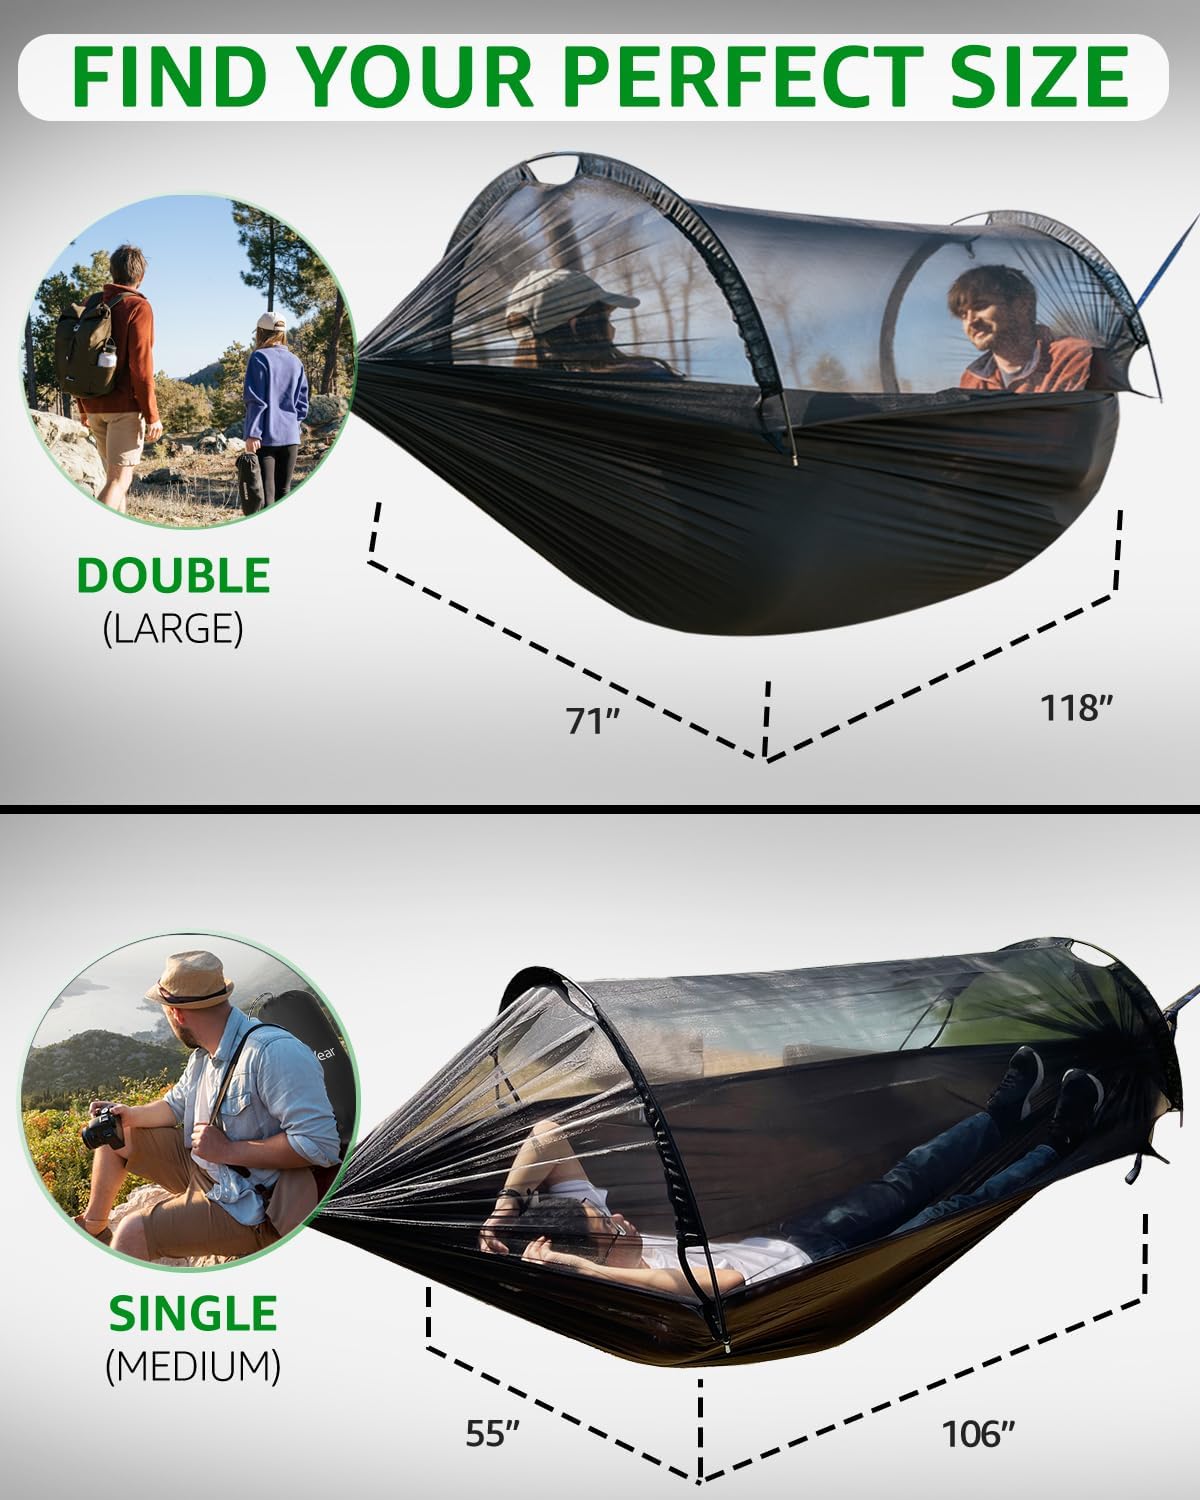 Sunyear Camping Hammock with Net - Double&Single Hammock with House-Like Net- Easy Setup & Pack, Lightweight & Portable, Perfect for Hiking, Backpacking, Outdoor Sleeping（106"L x 55"W）